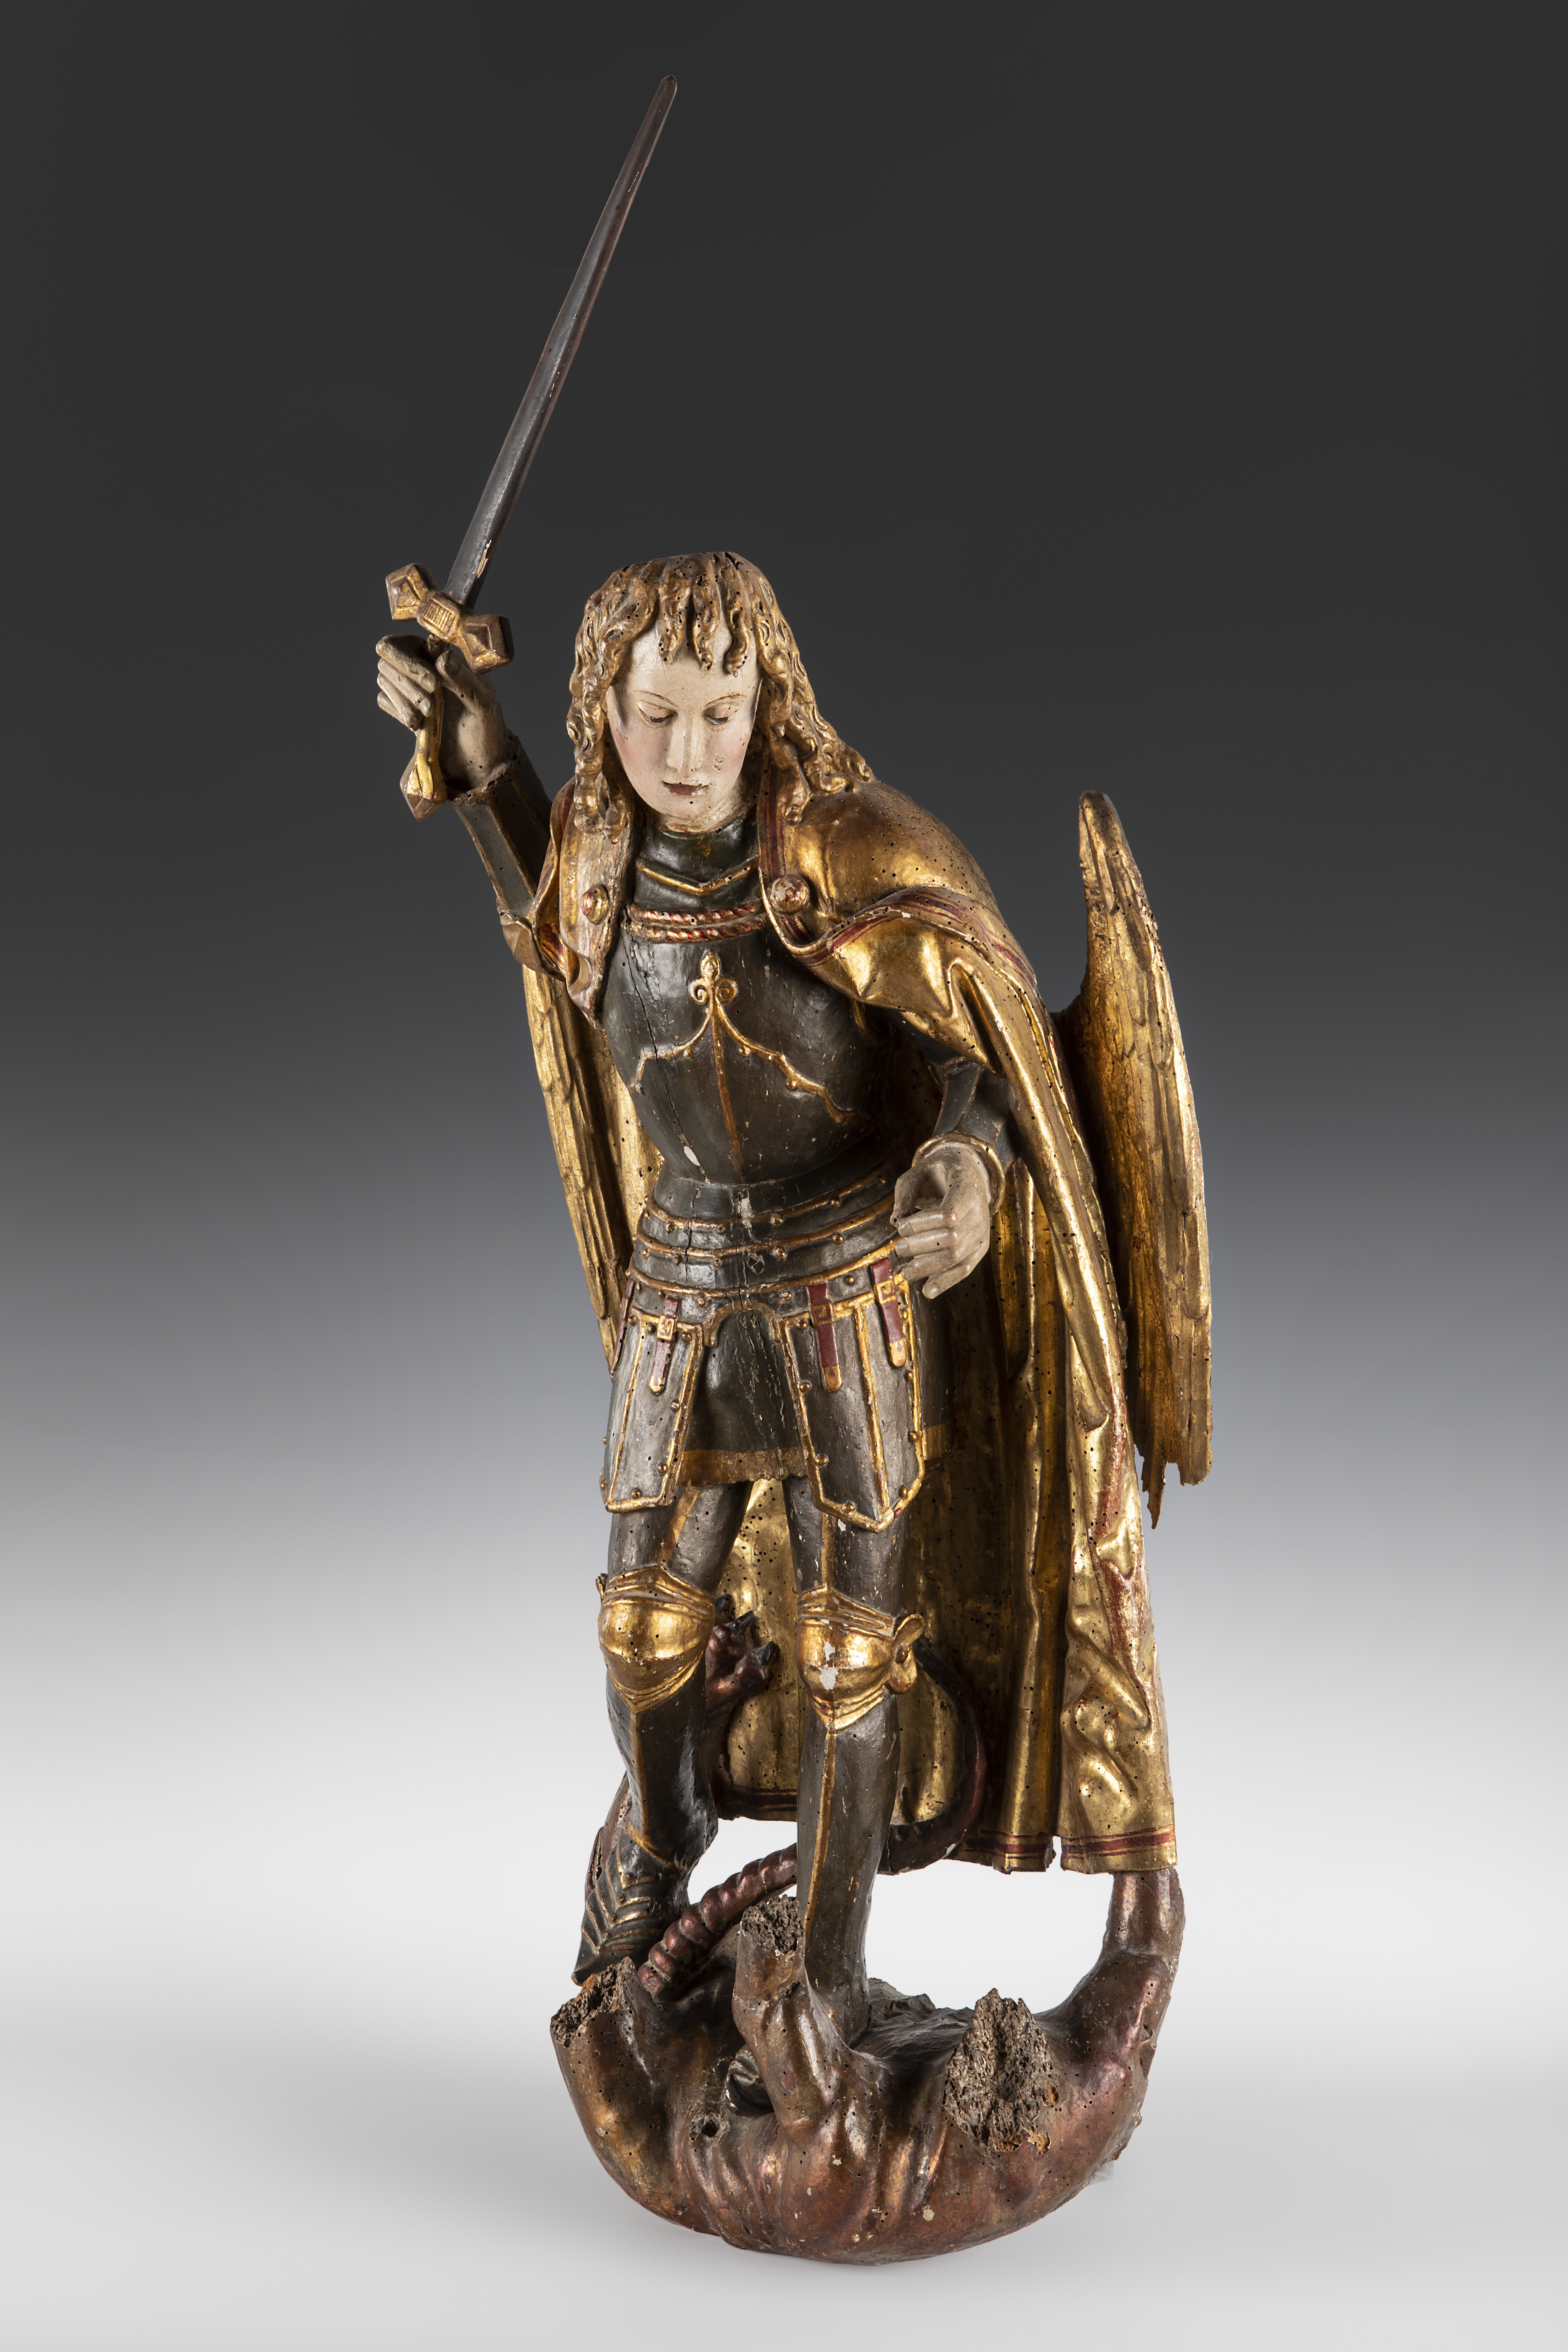 South German school, late 15th-early 16th century. "St. Michael the Archangel". Wood carving